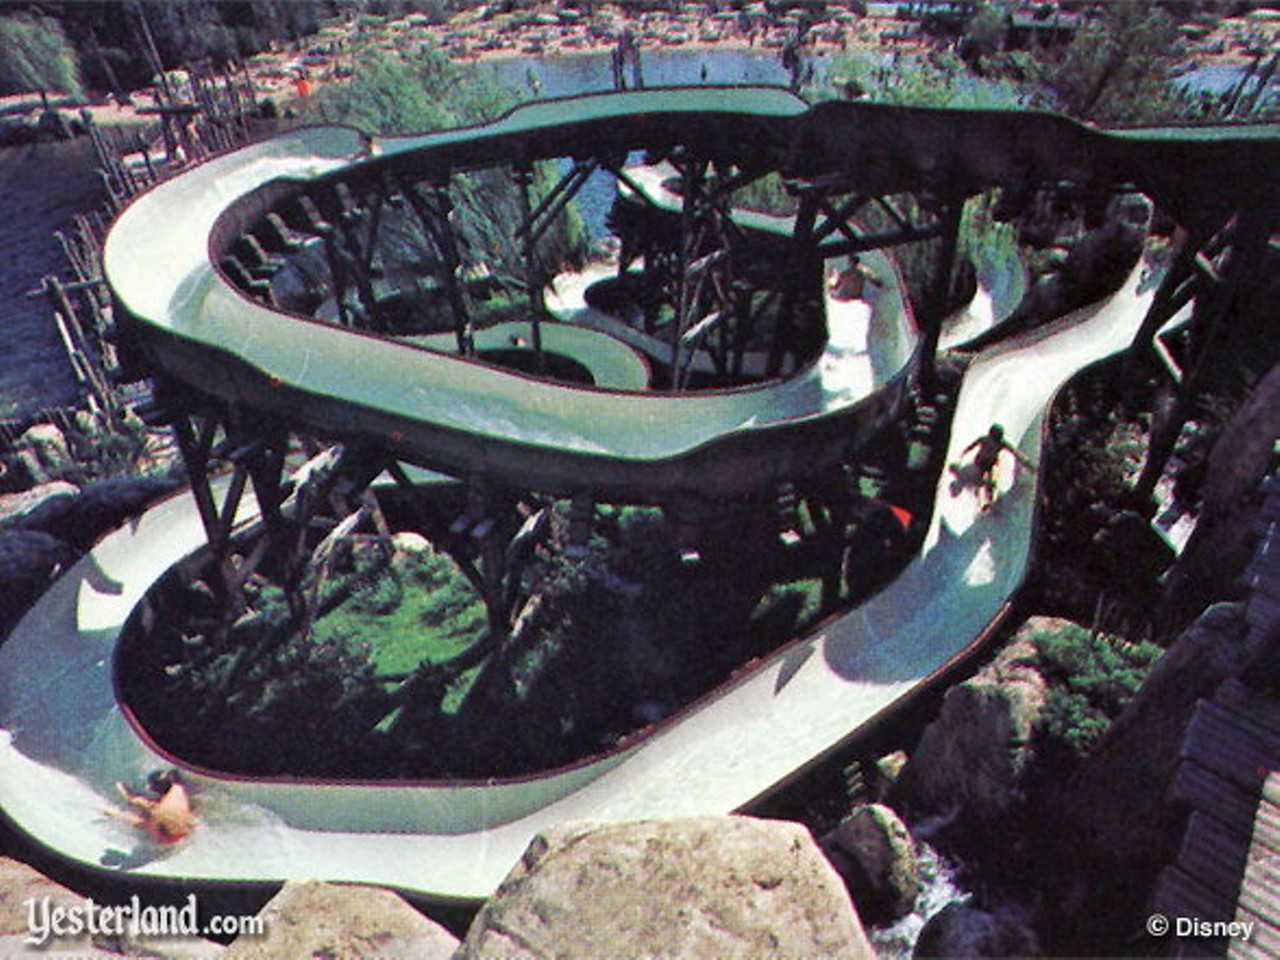 It was huge, and full of crazy turns. Via yesterland.com